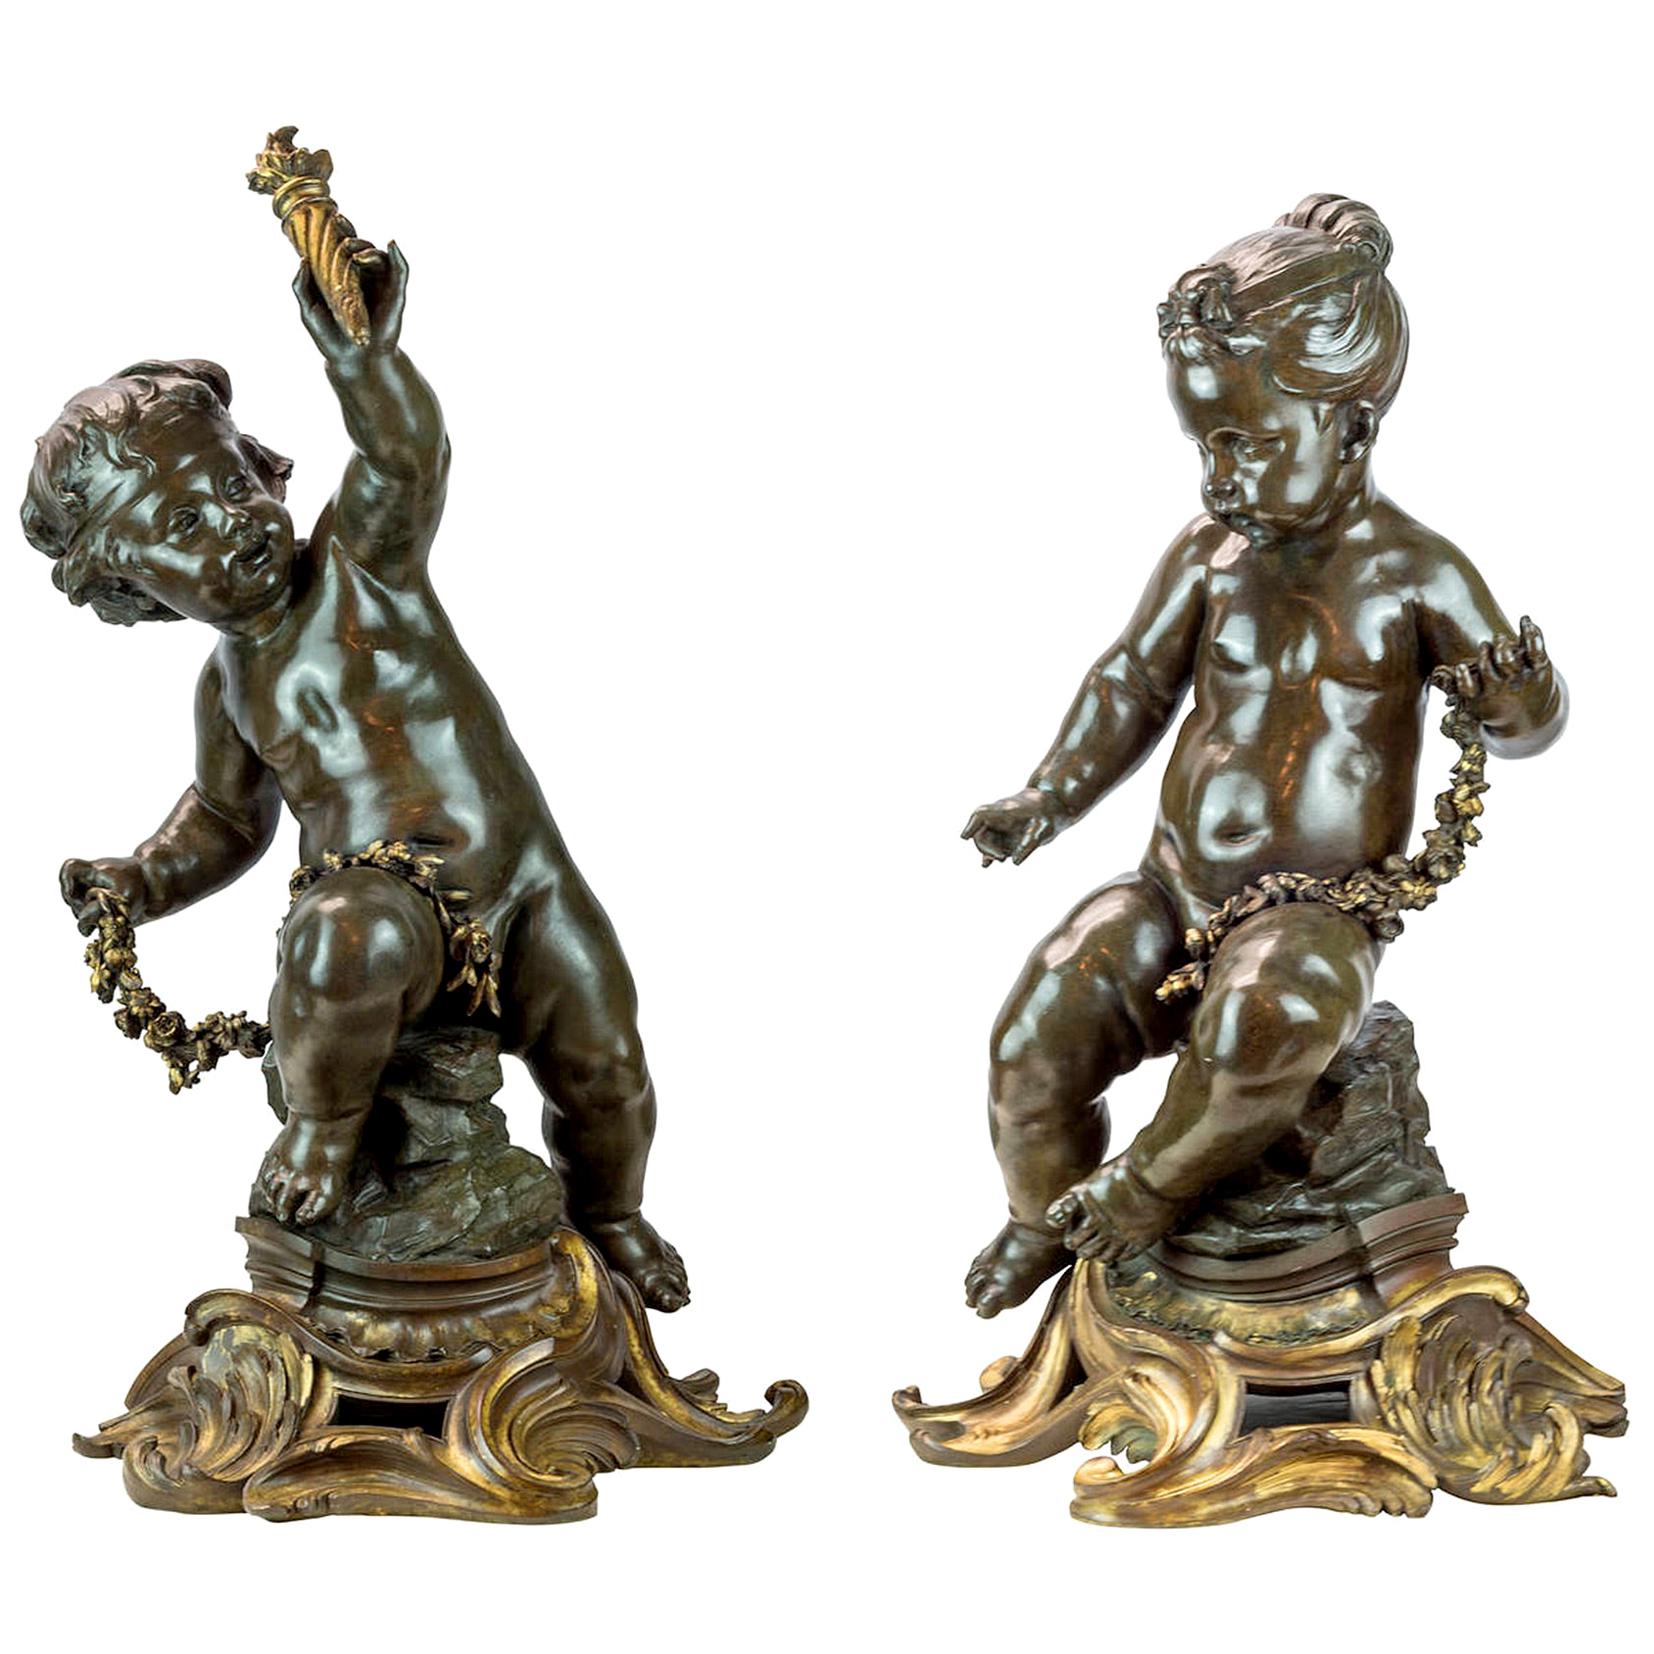 Monumental Pair of 19th Century Gilt and Patinated Bronze Sculptures of Putti